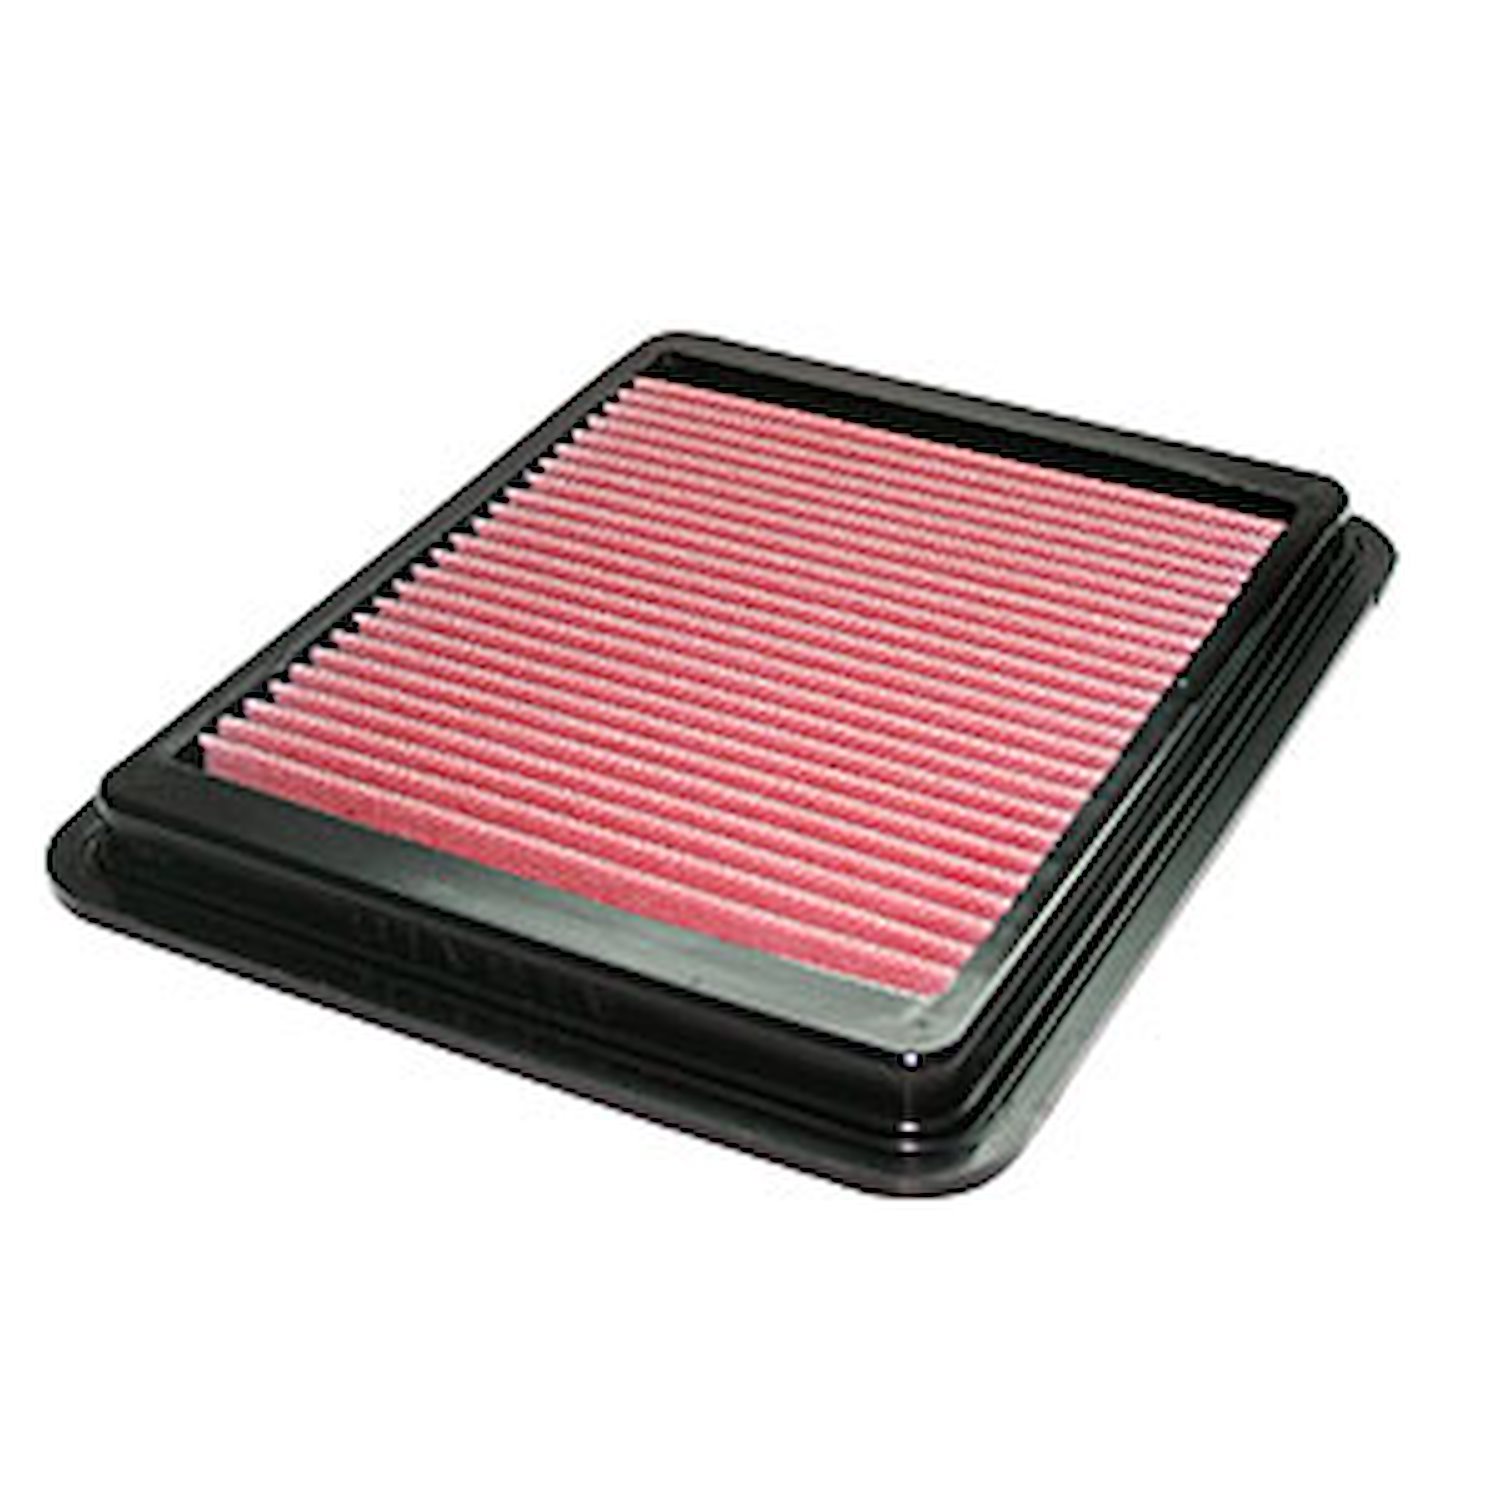 SynthaMax "Dry" OE Replacement Filter 2002-2007 Saturn Vue 3.0/3.5L V6 and 2.2L 4-Cylinder